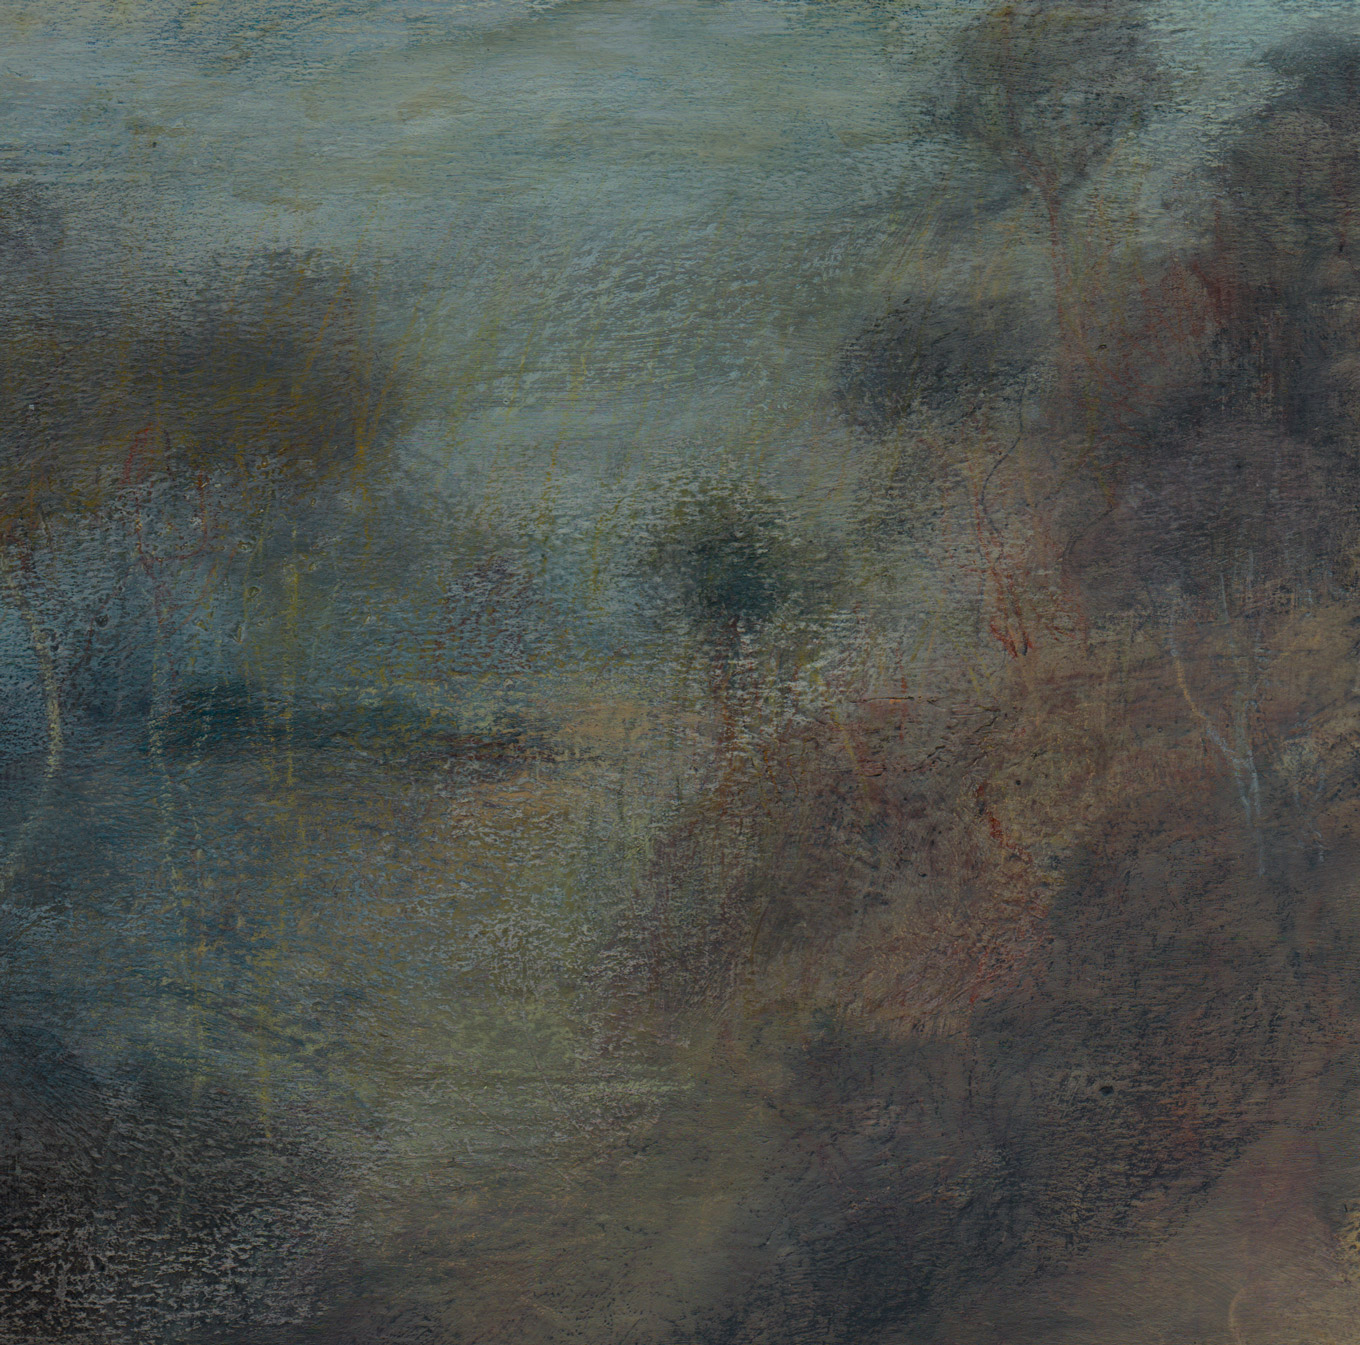 L1160 - Nicholas Herbert, British Artist, mixed media landscape painting of a view from the West Flank of the Ivinghoe Beacon, 2019